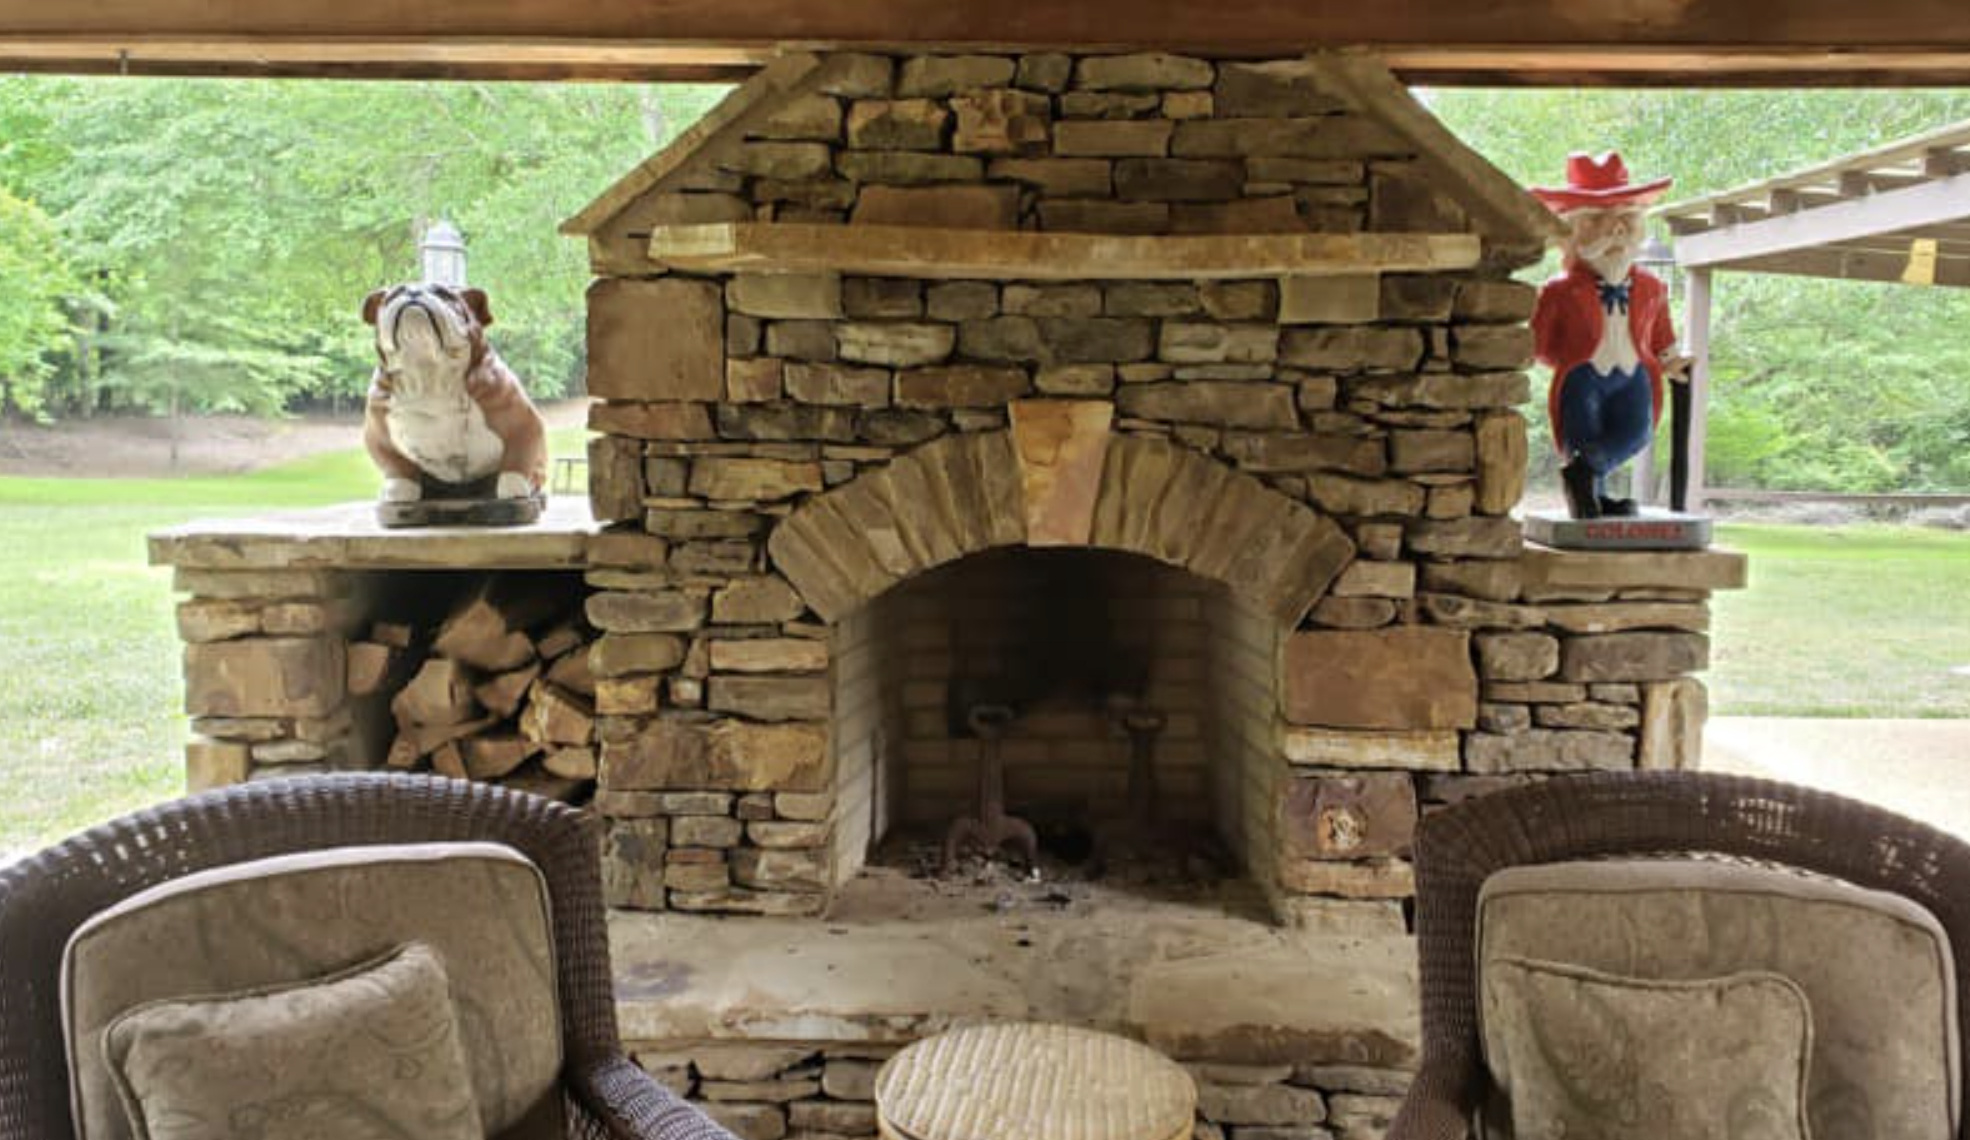 this image shows fireplace in Diamond Bar, California